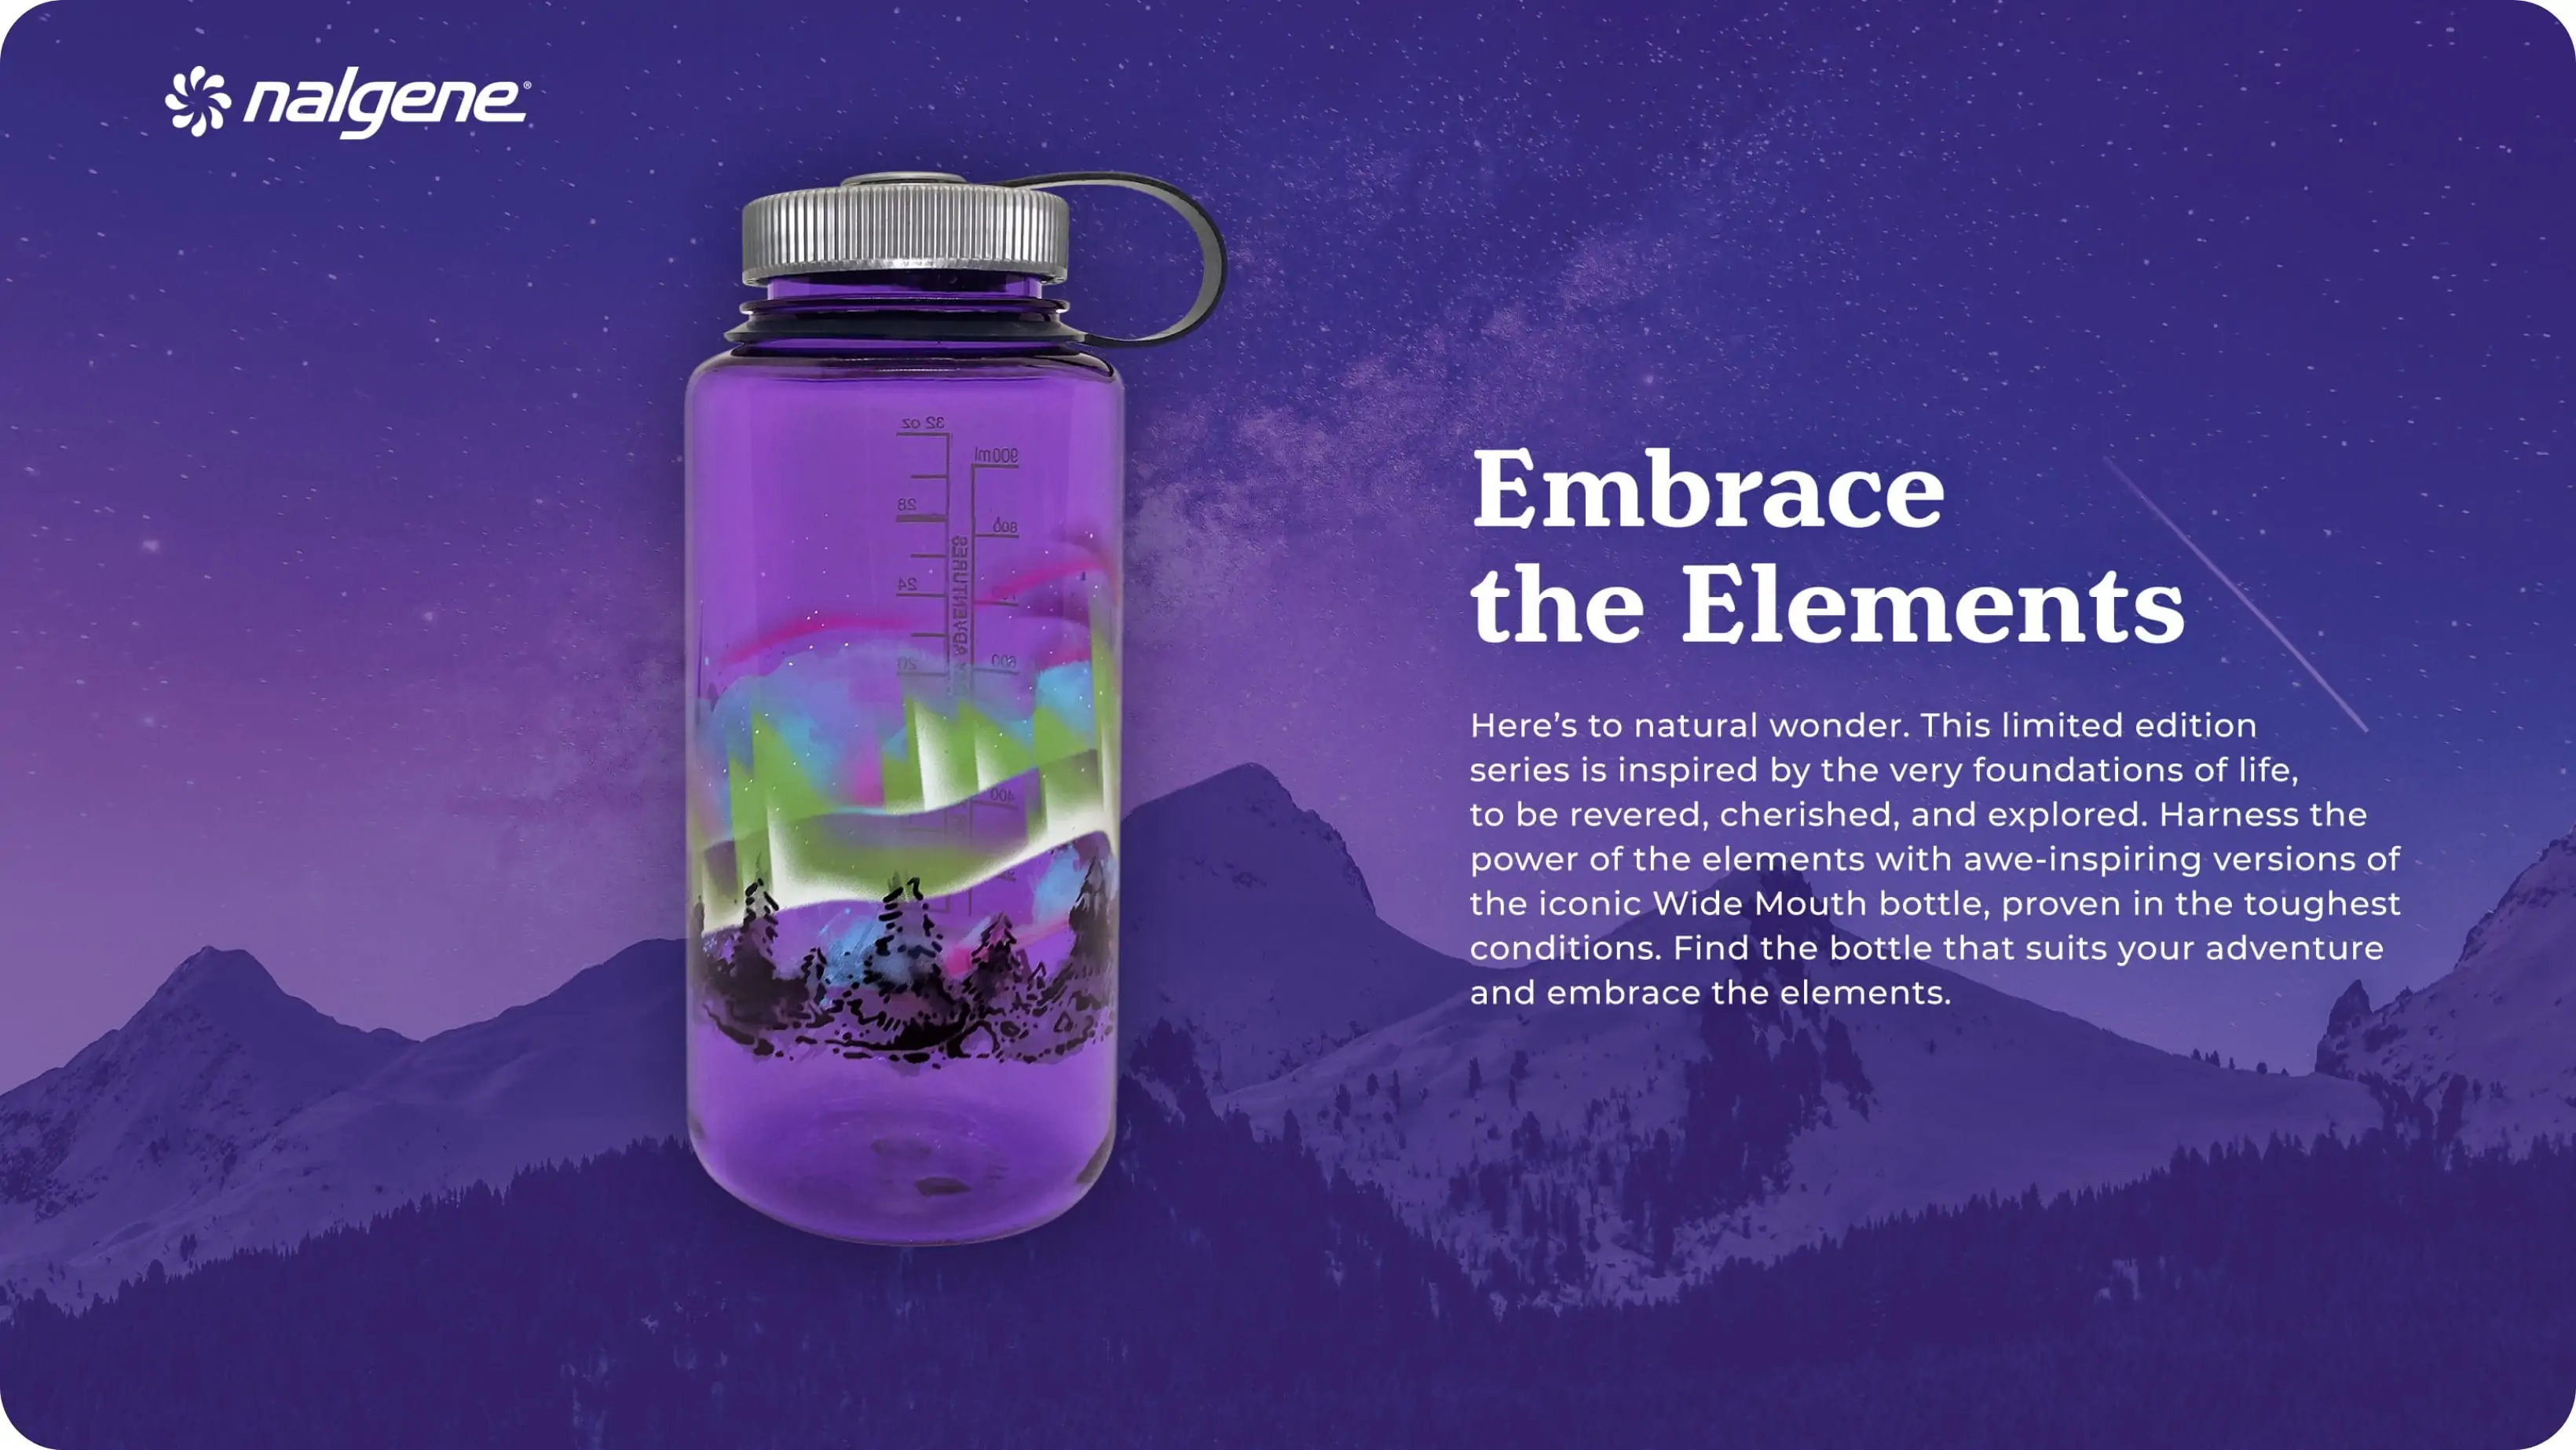 marketing material for Nalgene. Purple-ish background with mountains and stars. Image of a nalgene water bottle with trees on it and aurora borealis with text "Embrace the elements"